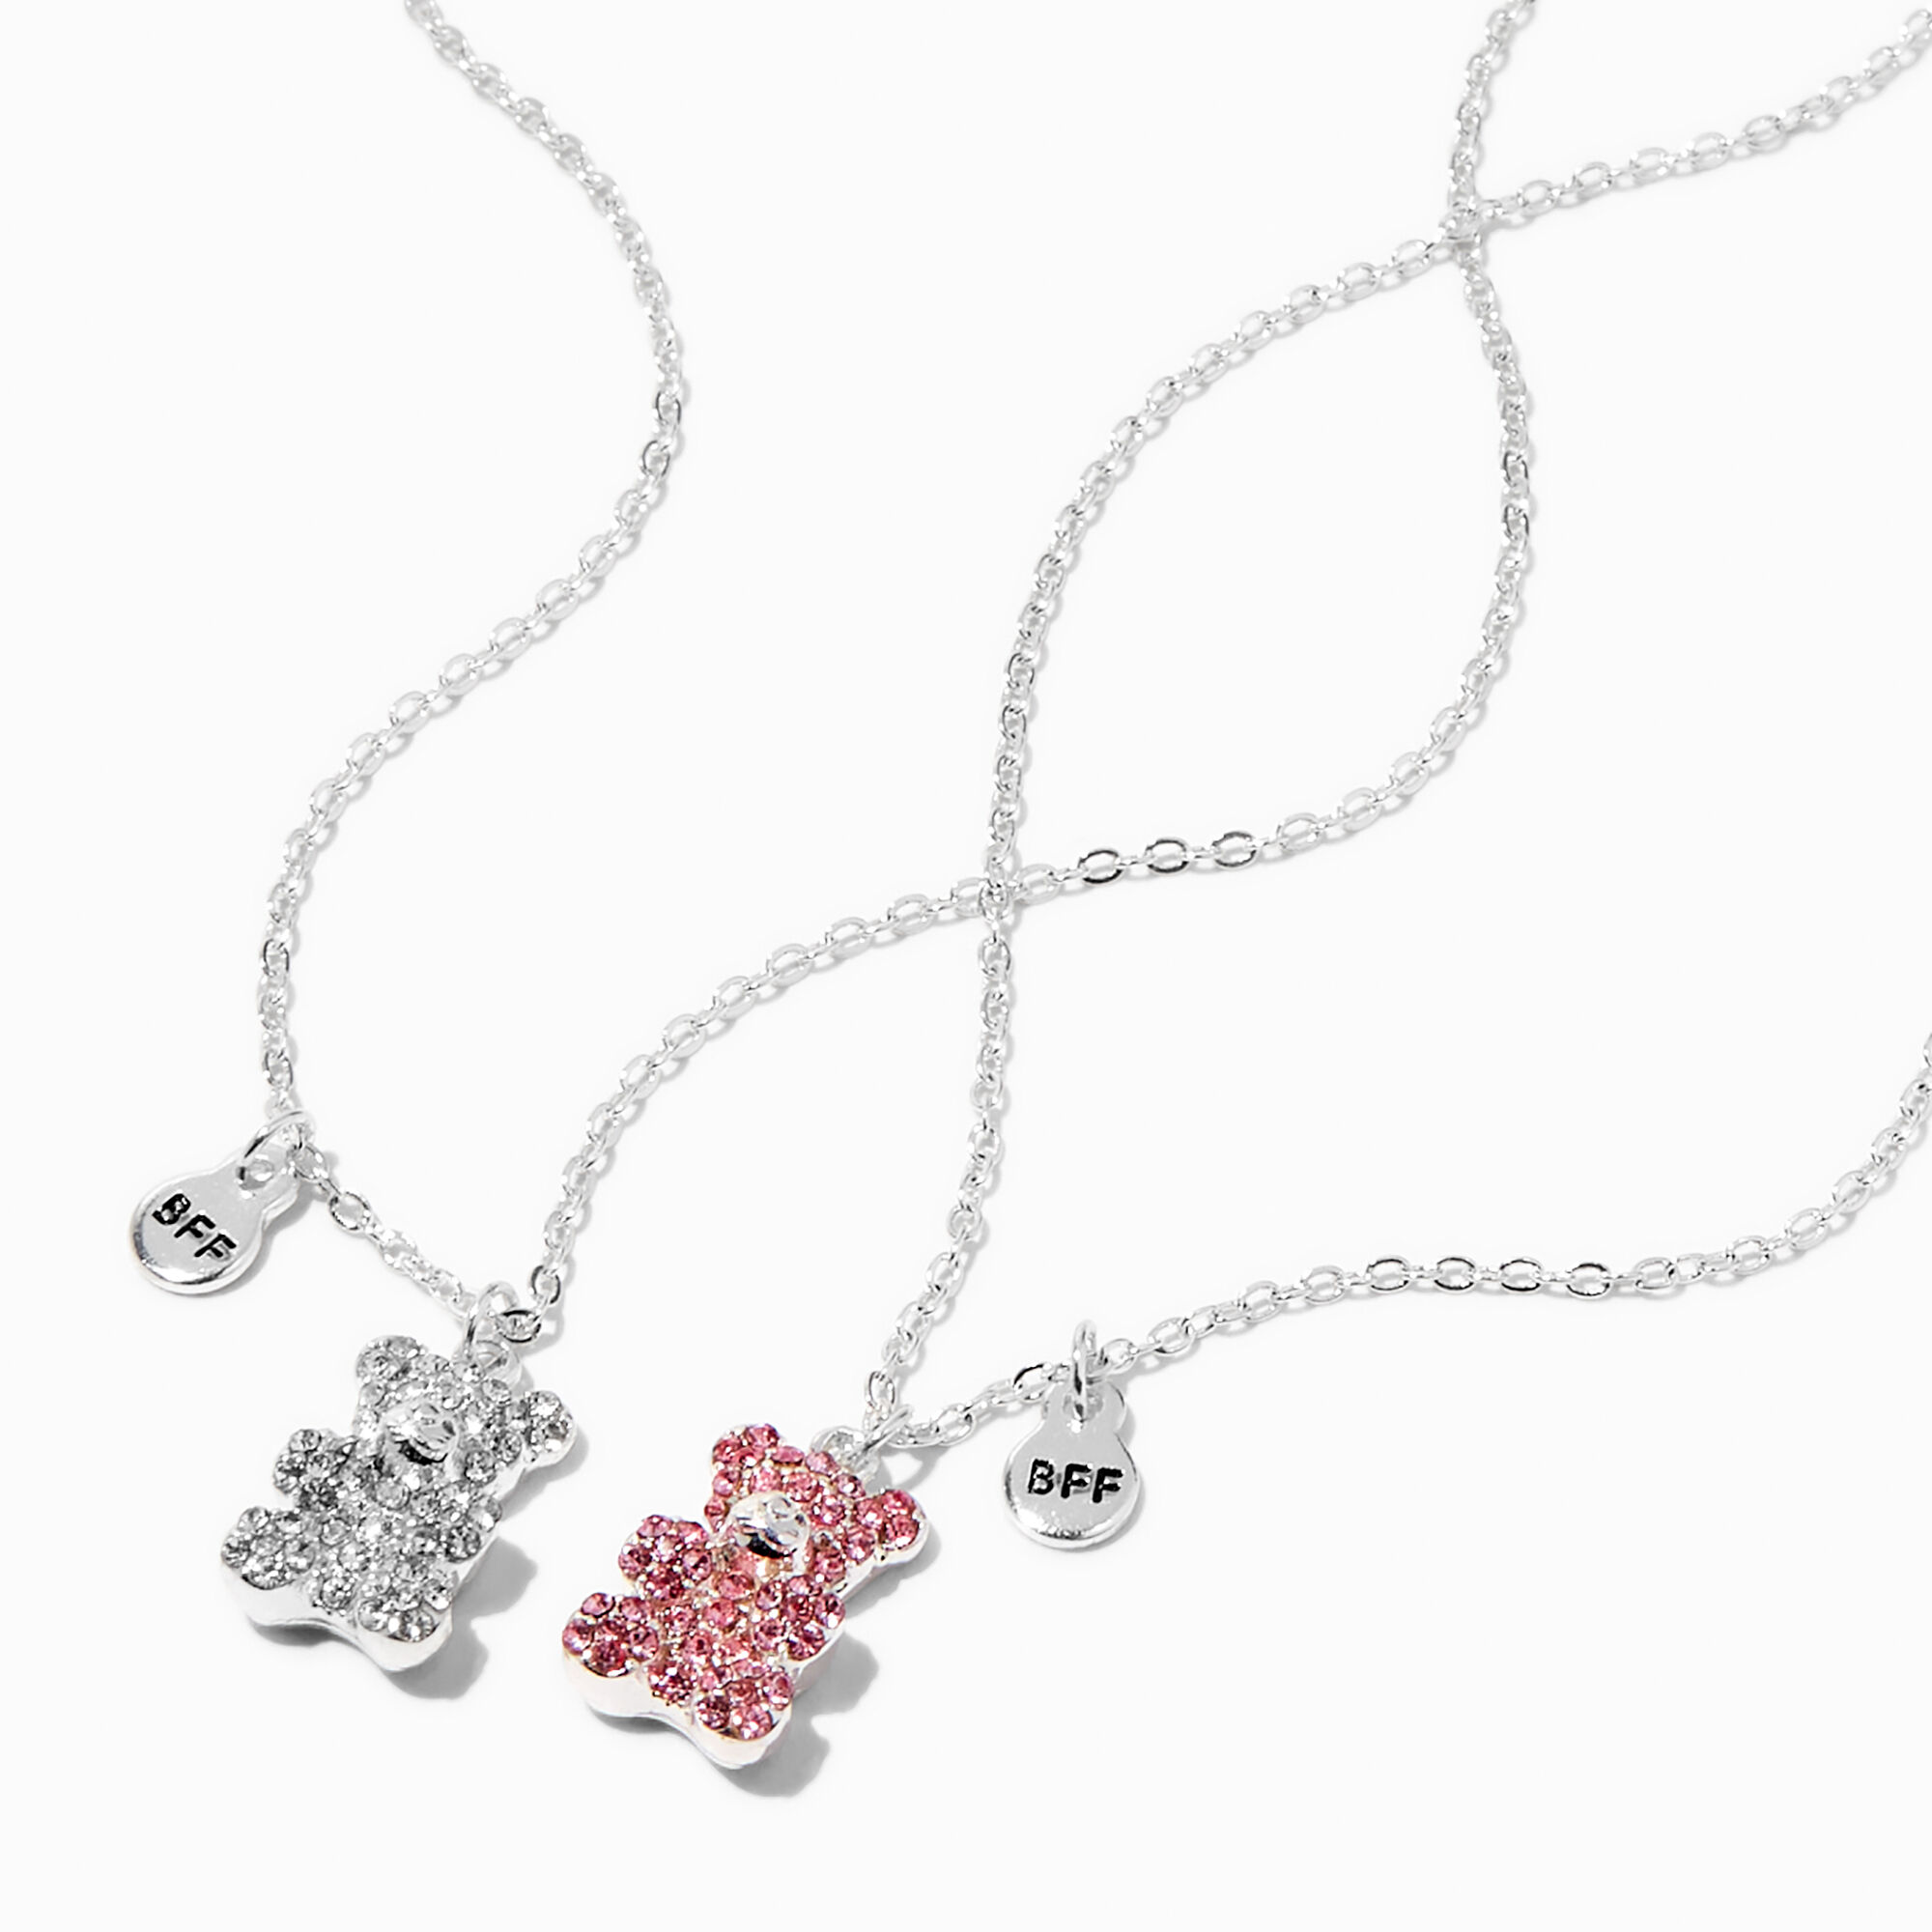 View Claires Best Friends Rhinestone Bear Pendant Necklaces 2 Pack Pink information